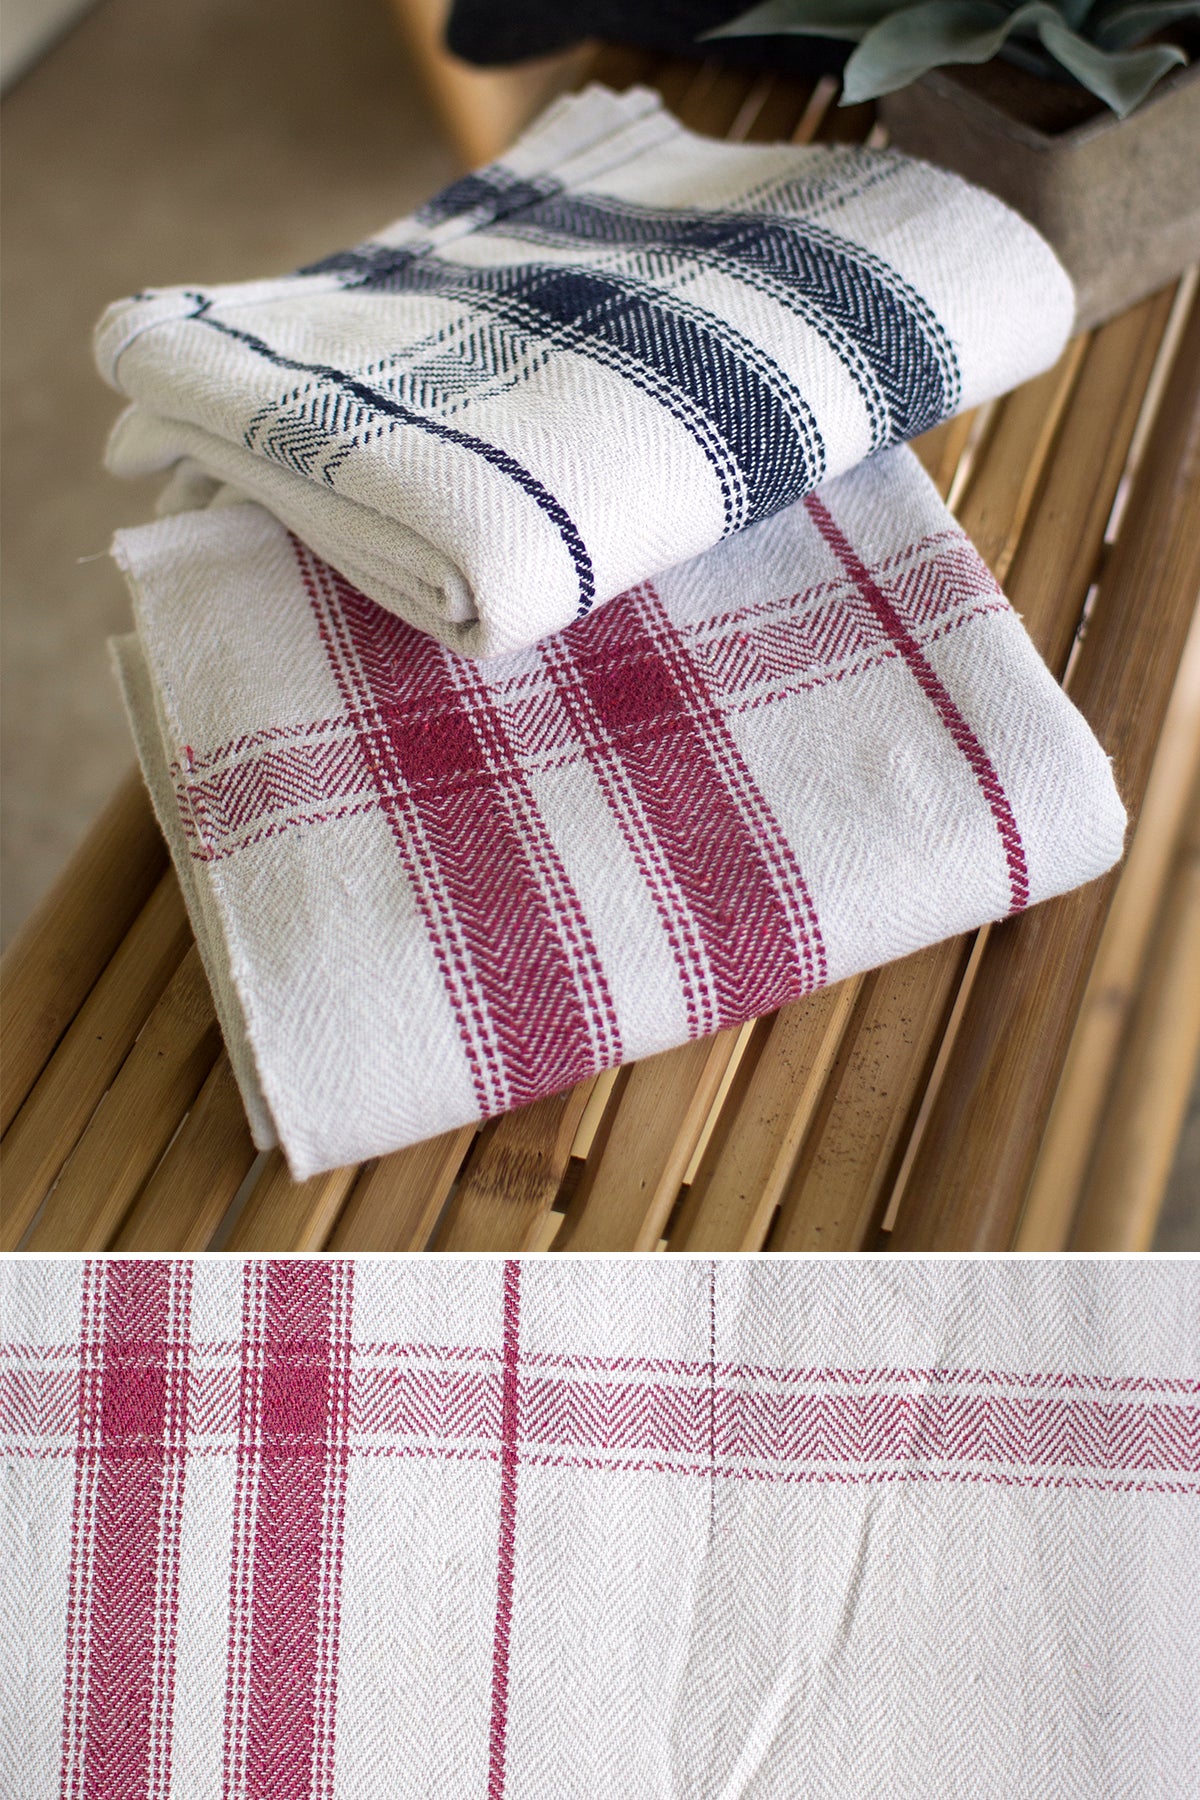 Cotton Blanket or Table Cloth